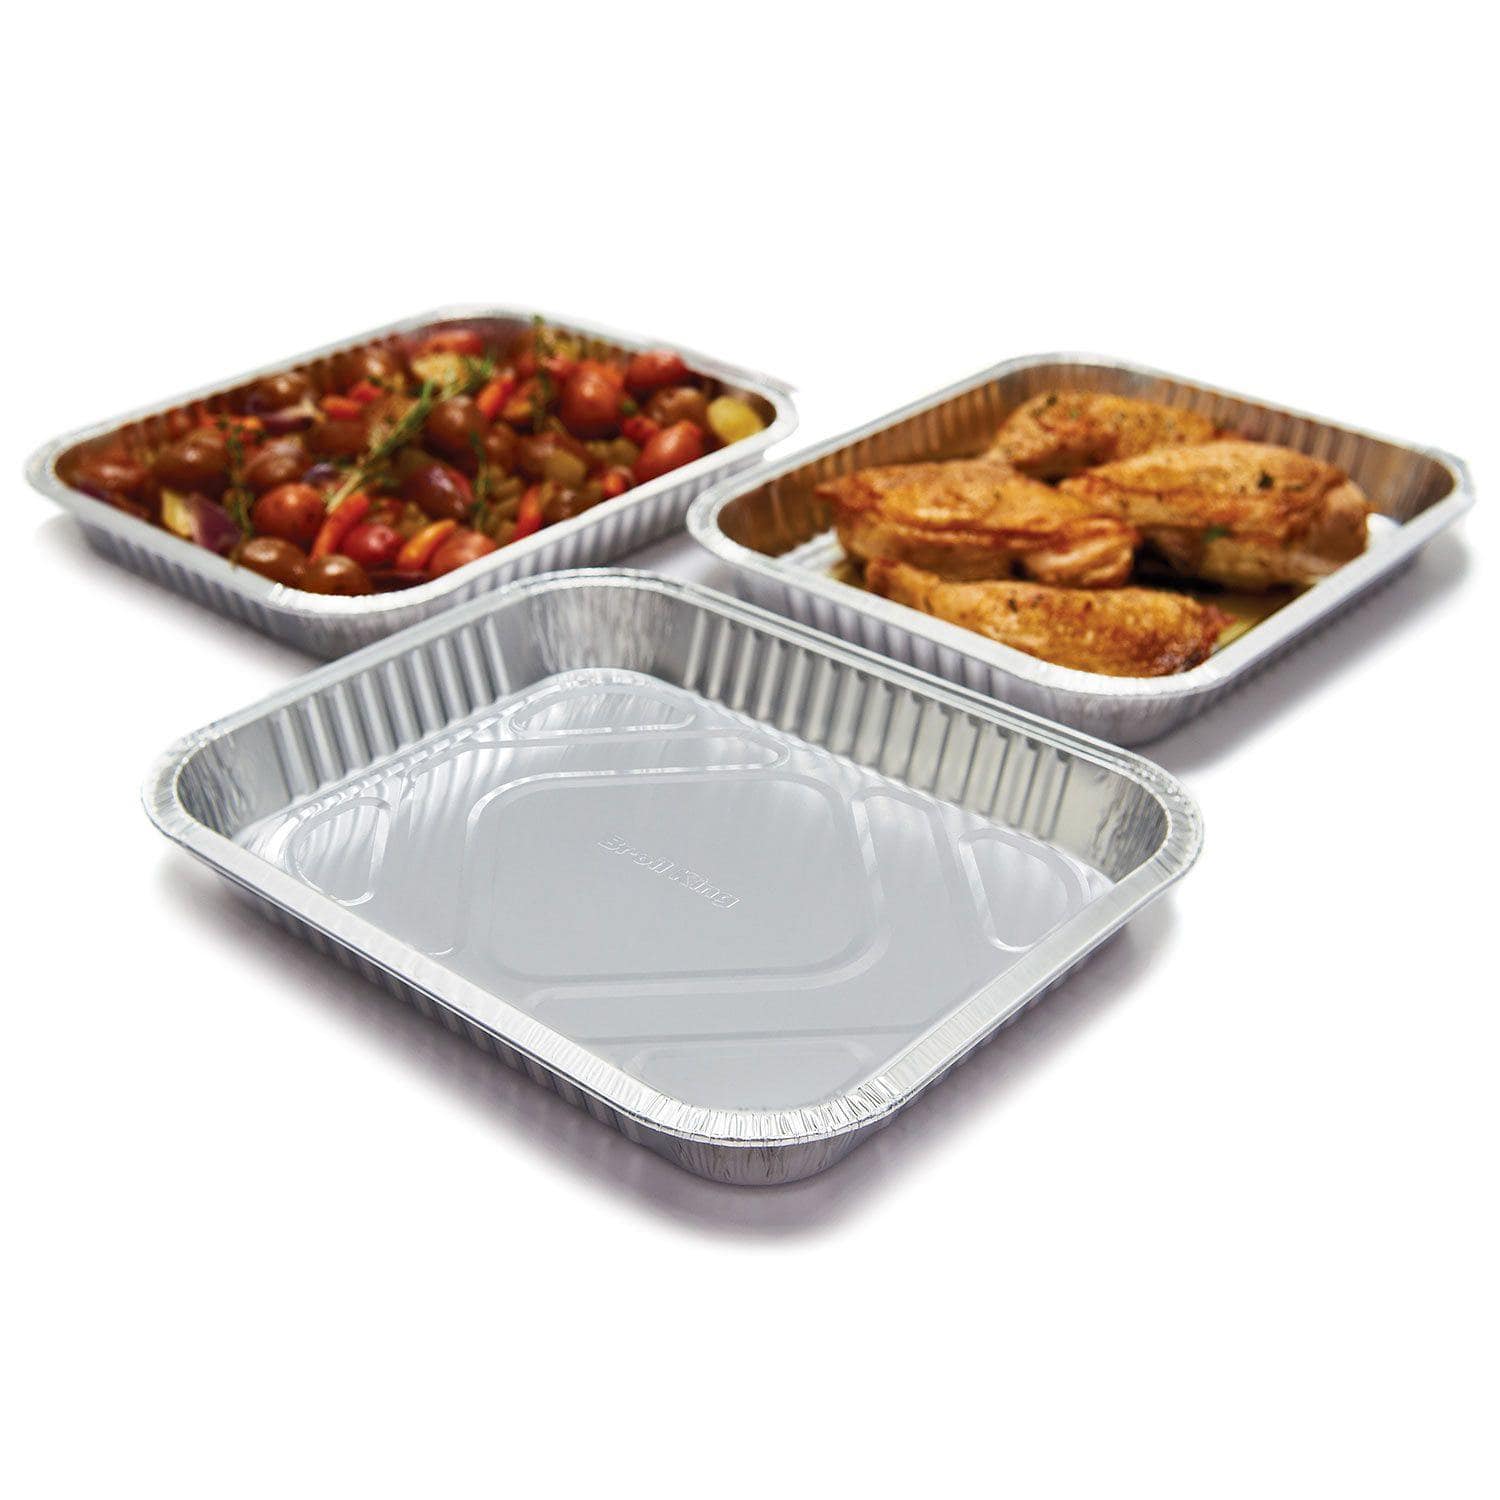 Broil King Broil King Accessories Broil King 13-Inch x 10-Inch Drip Pan Grease Tray Liners - Set of 3